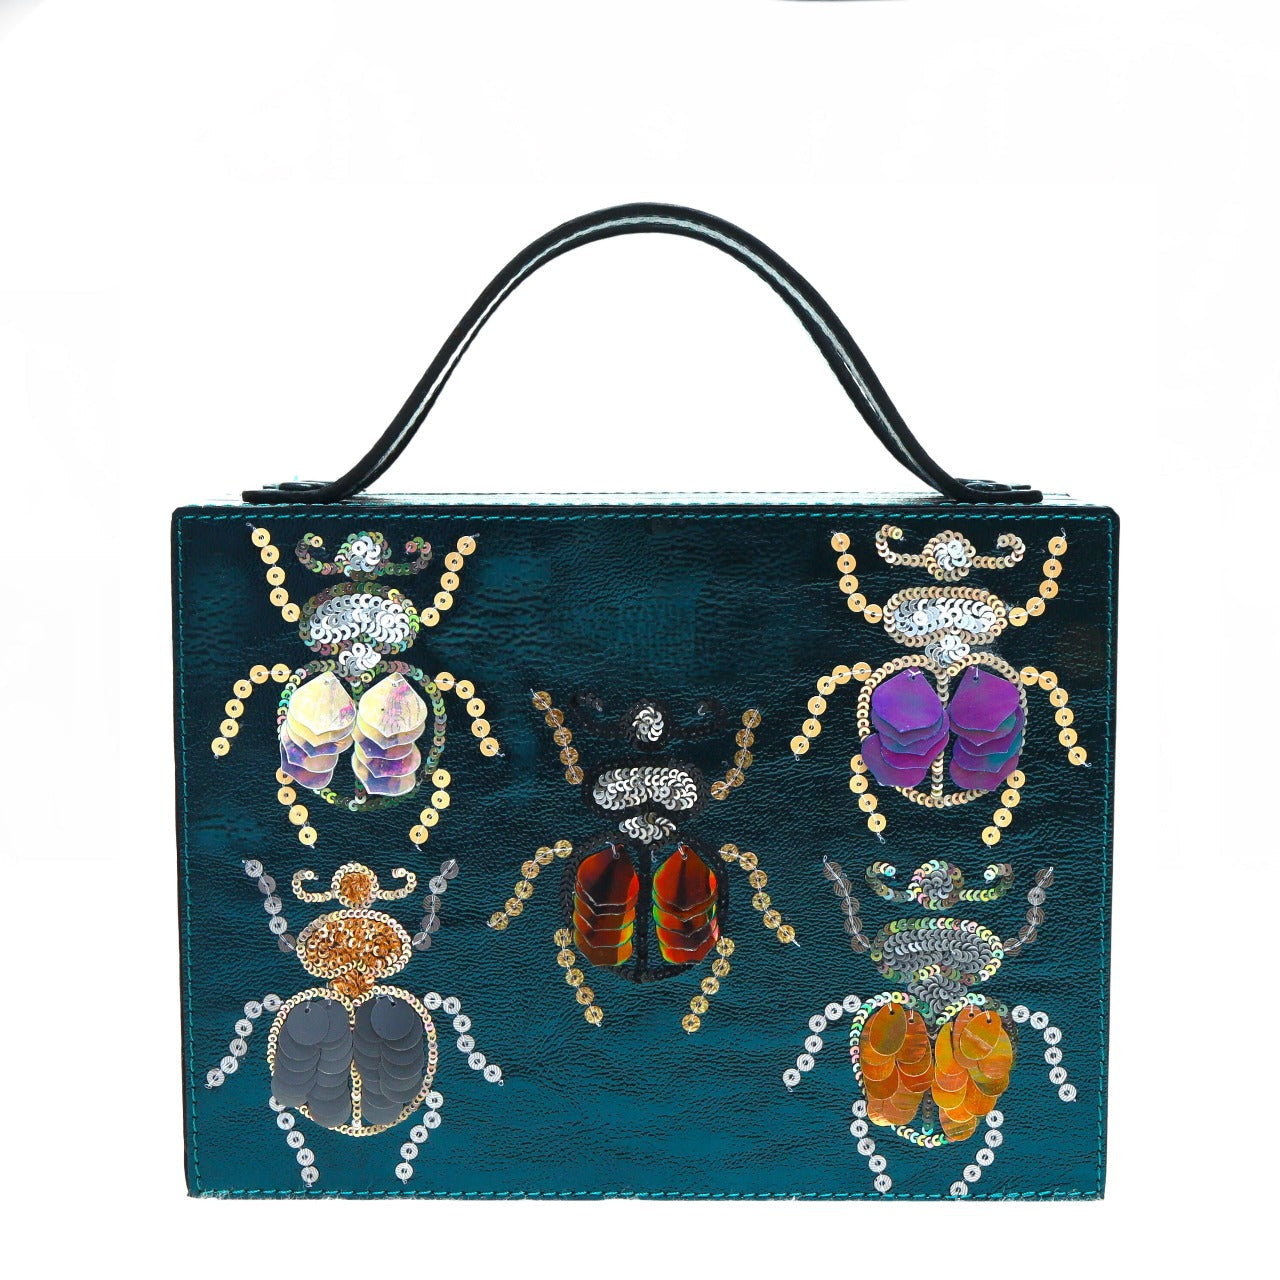 Bedazzled Beetle Briefcase Bag by Simitri